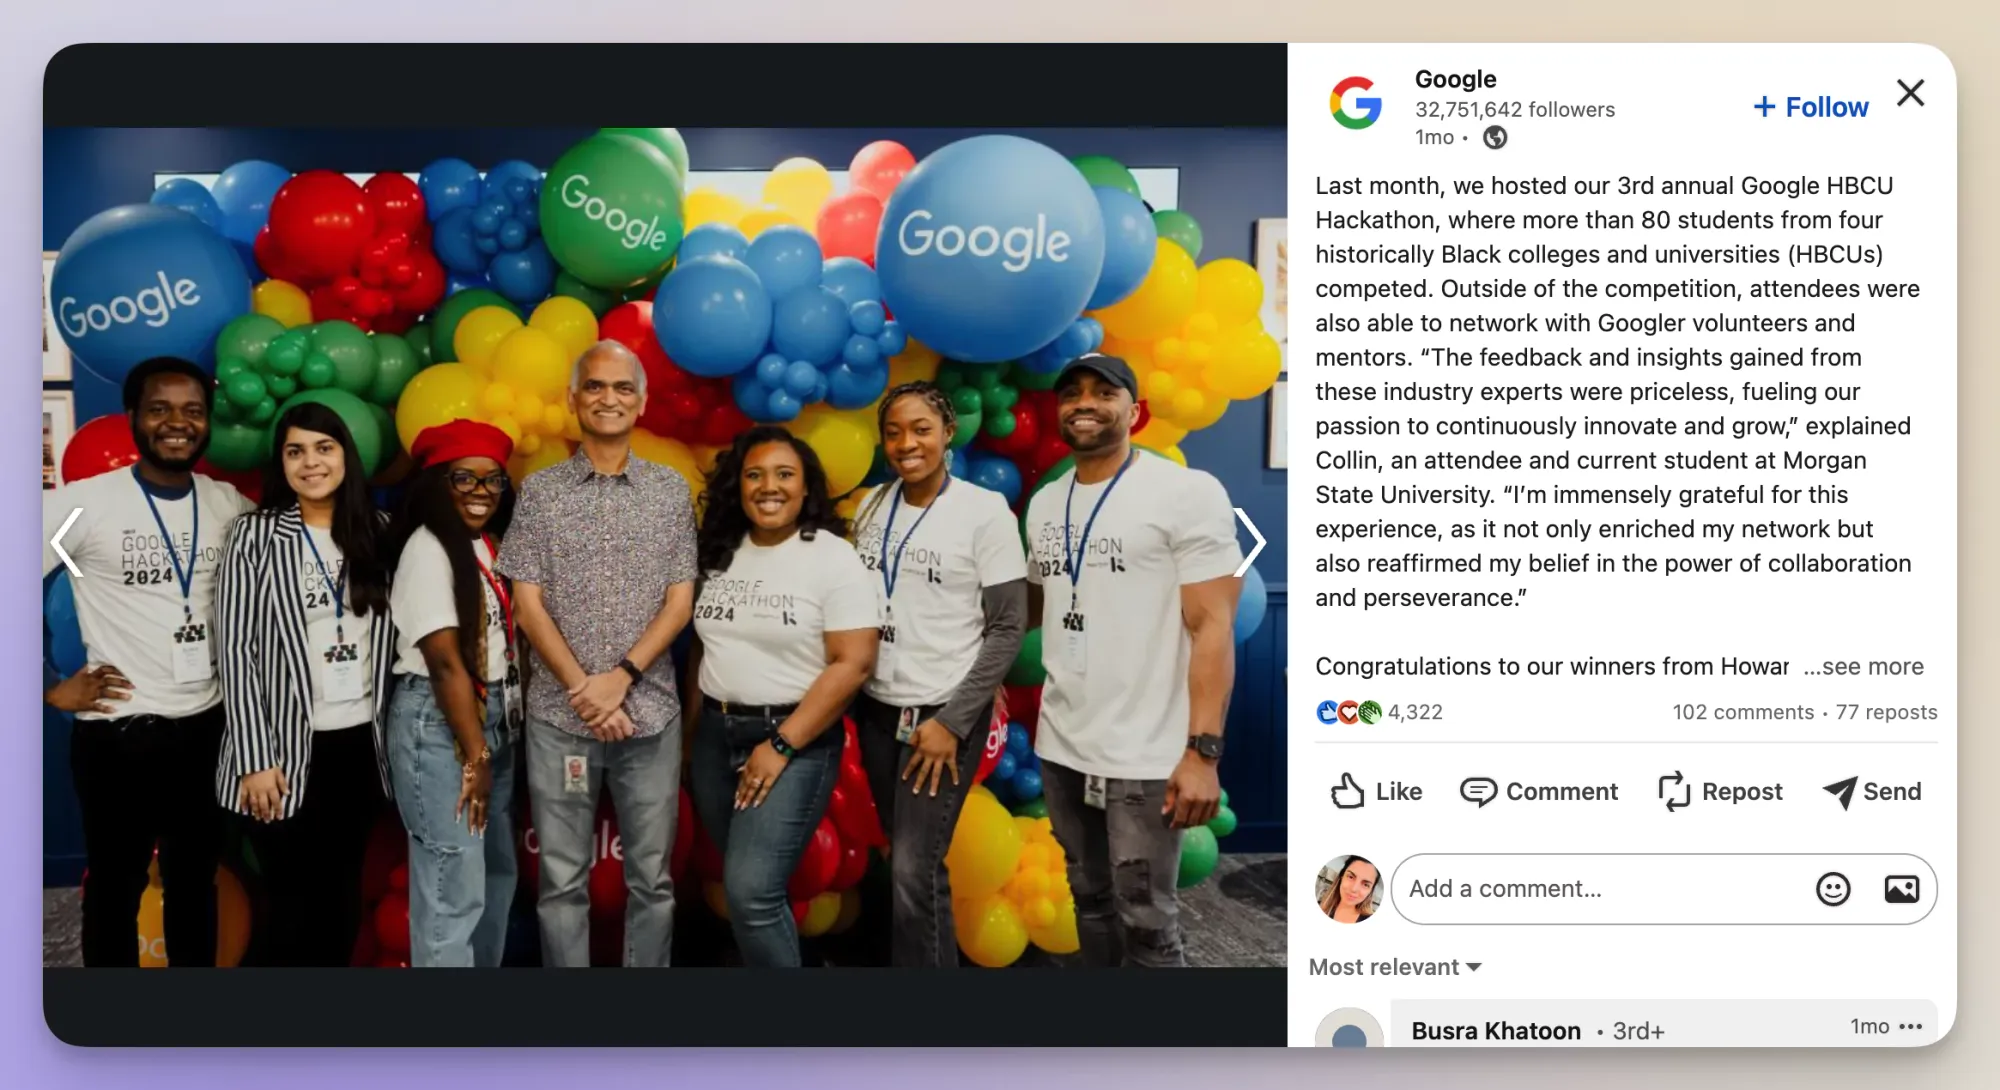 company culture as a linkedin post from google